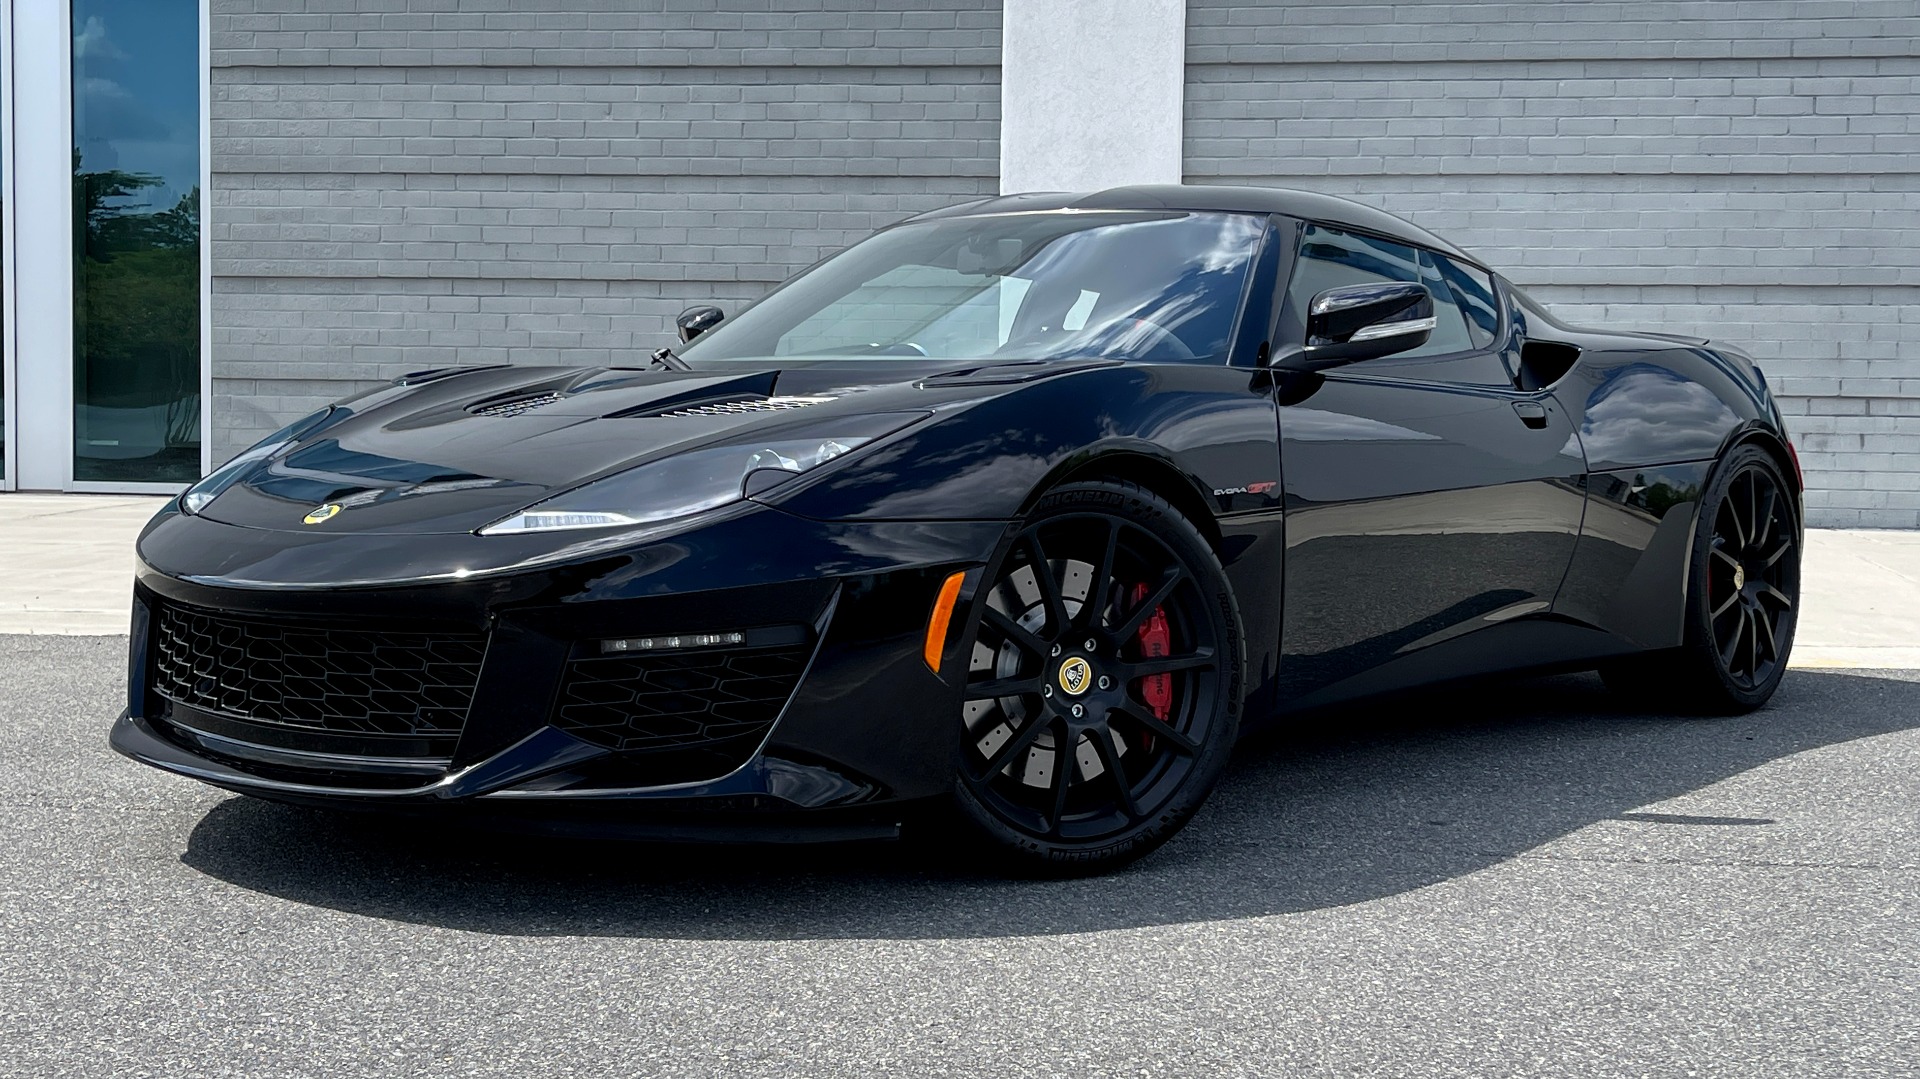 Used 2020 Lotus EVORA GT COUPE / 3.5L SC / NAV / ALPINE SND W/SUBWOOFER / REARVIEW for sale $102,895 at Formula Imports in Charlotte NC 28227 1